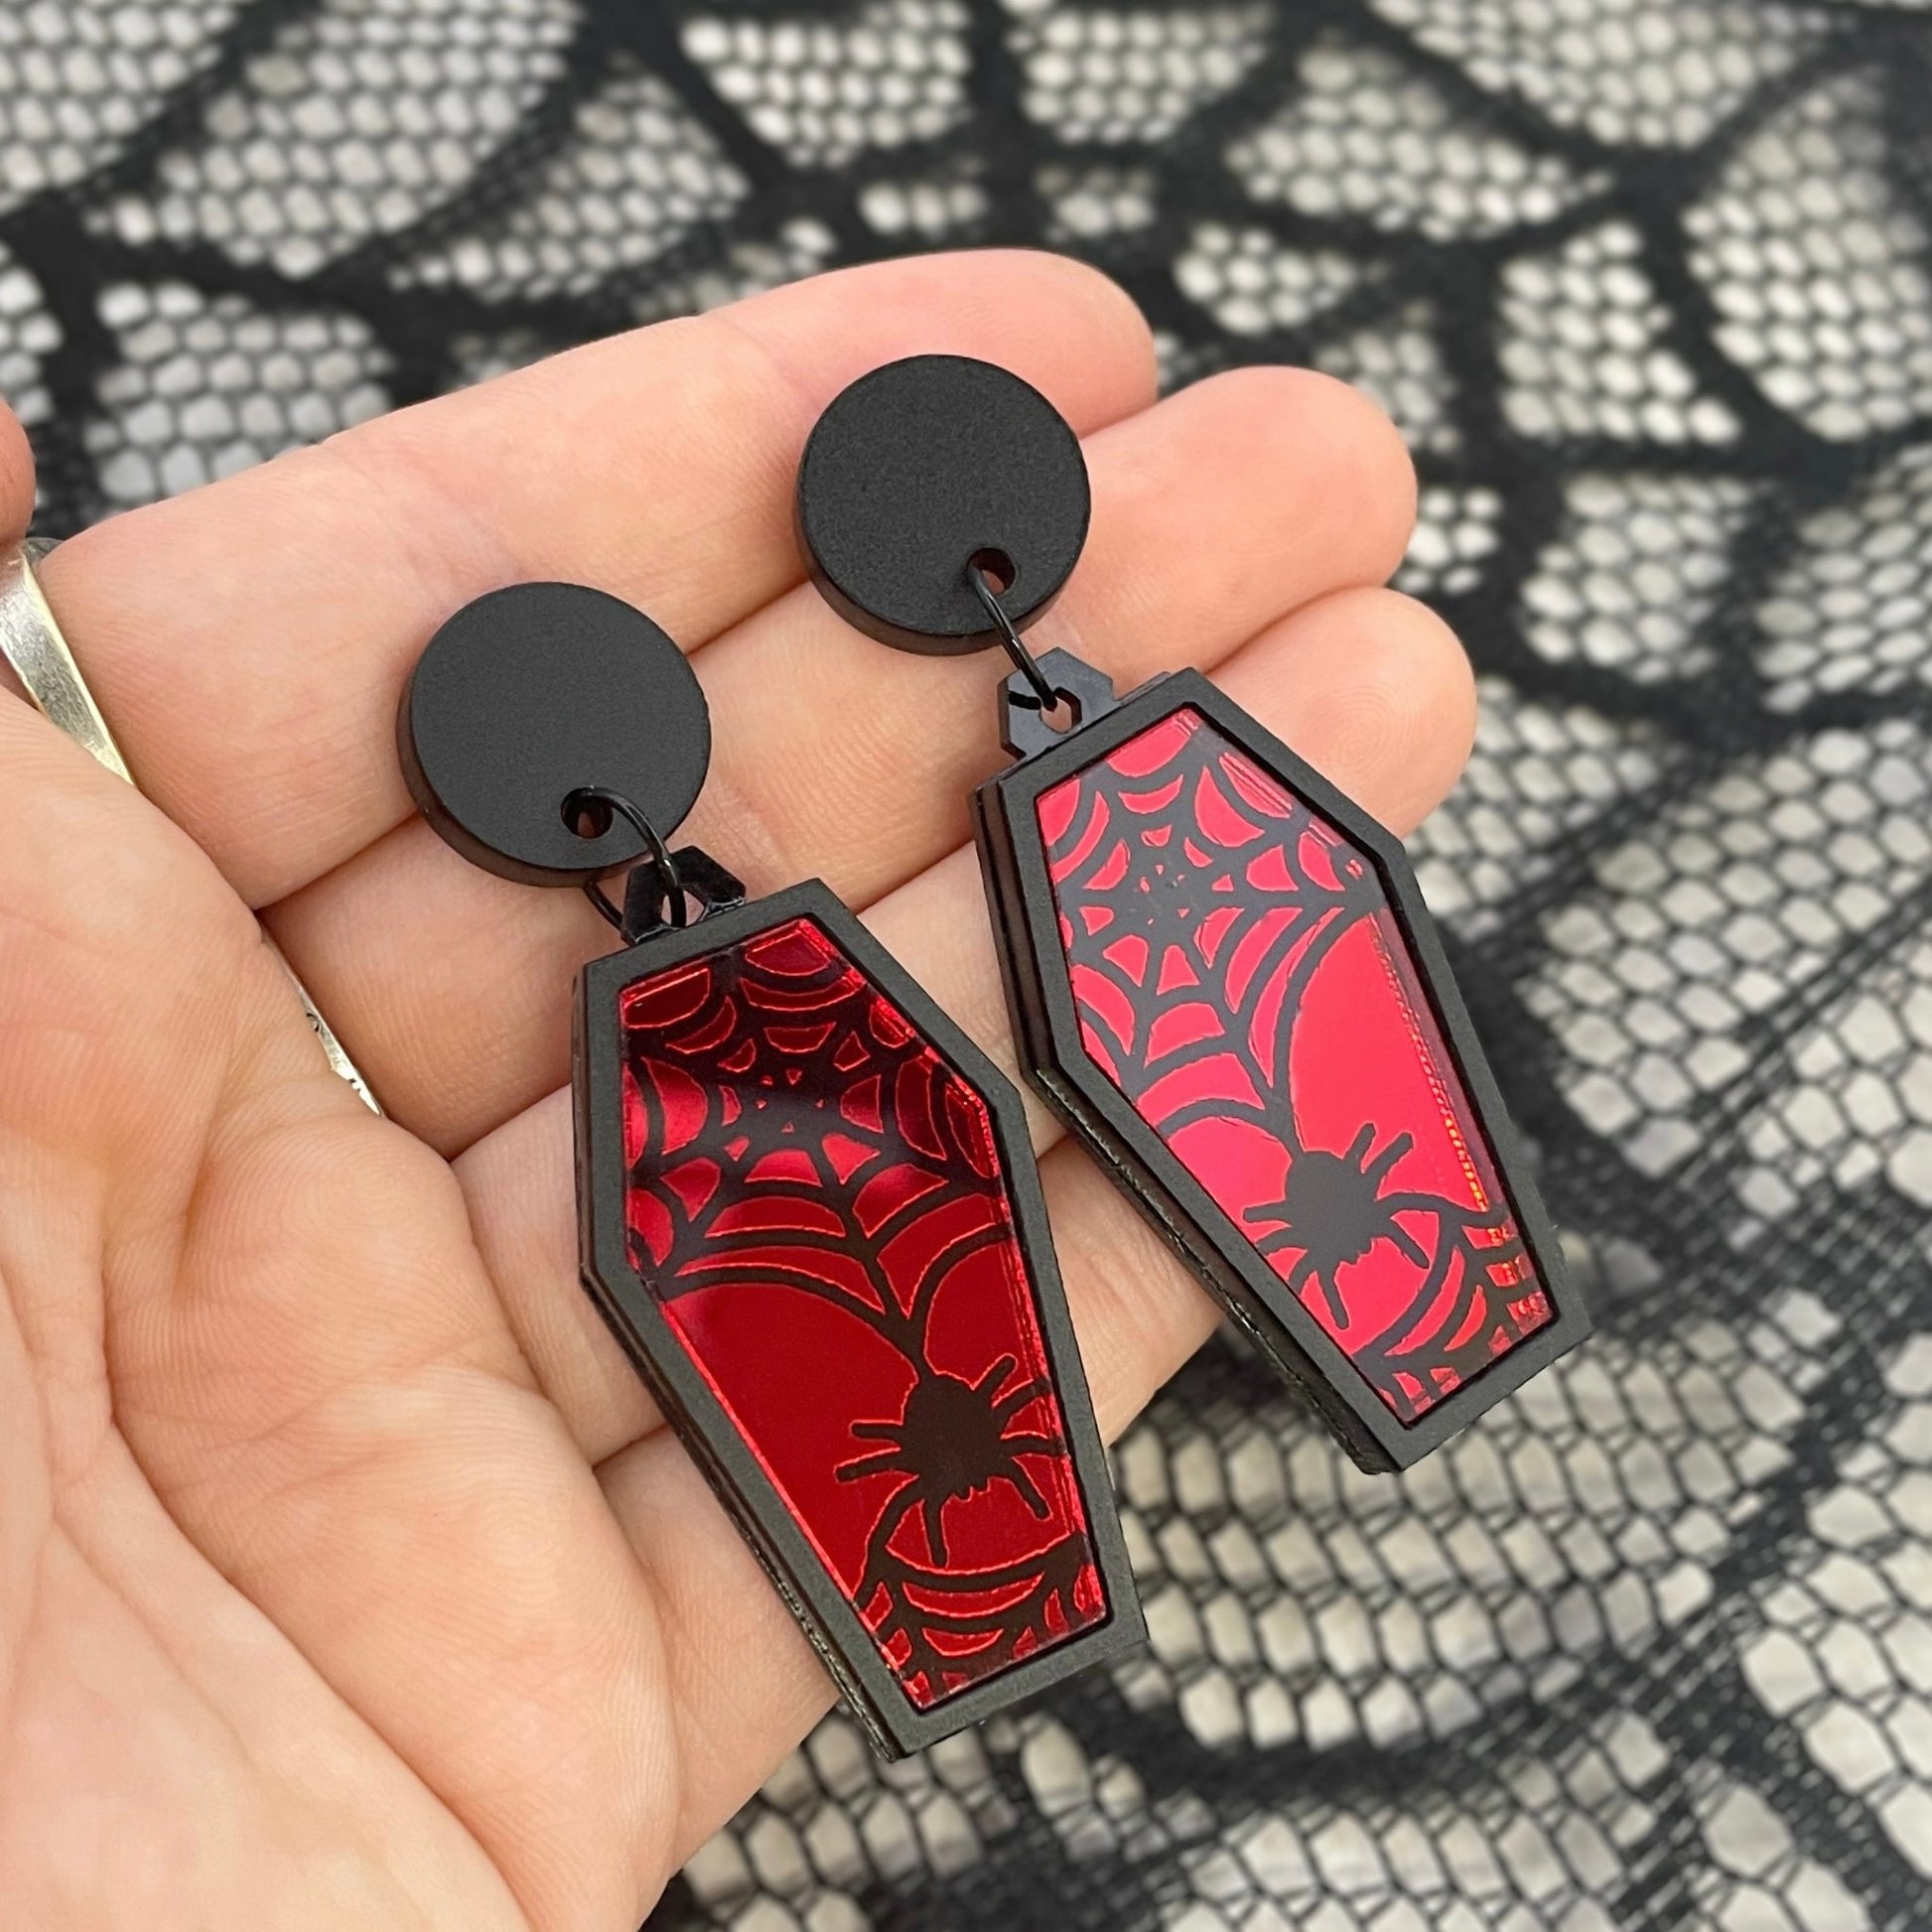 Red Spider Coffin Earrings - Lost Minds Clothing